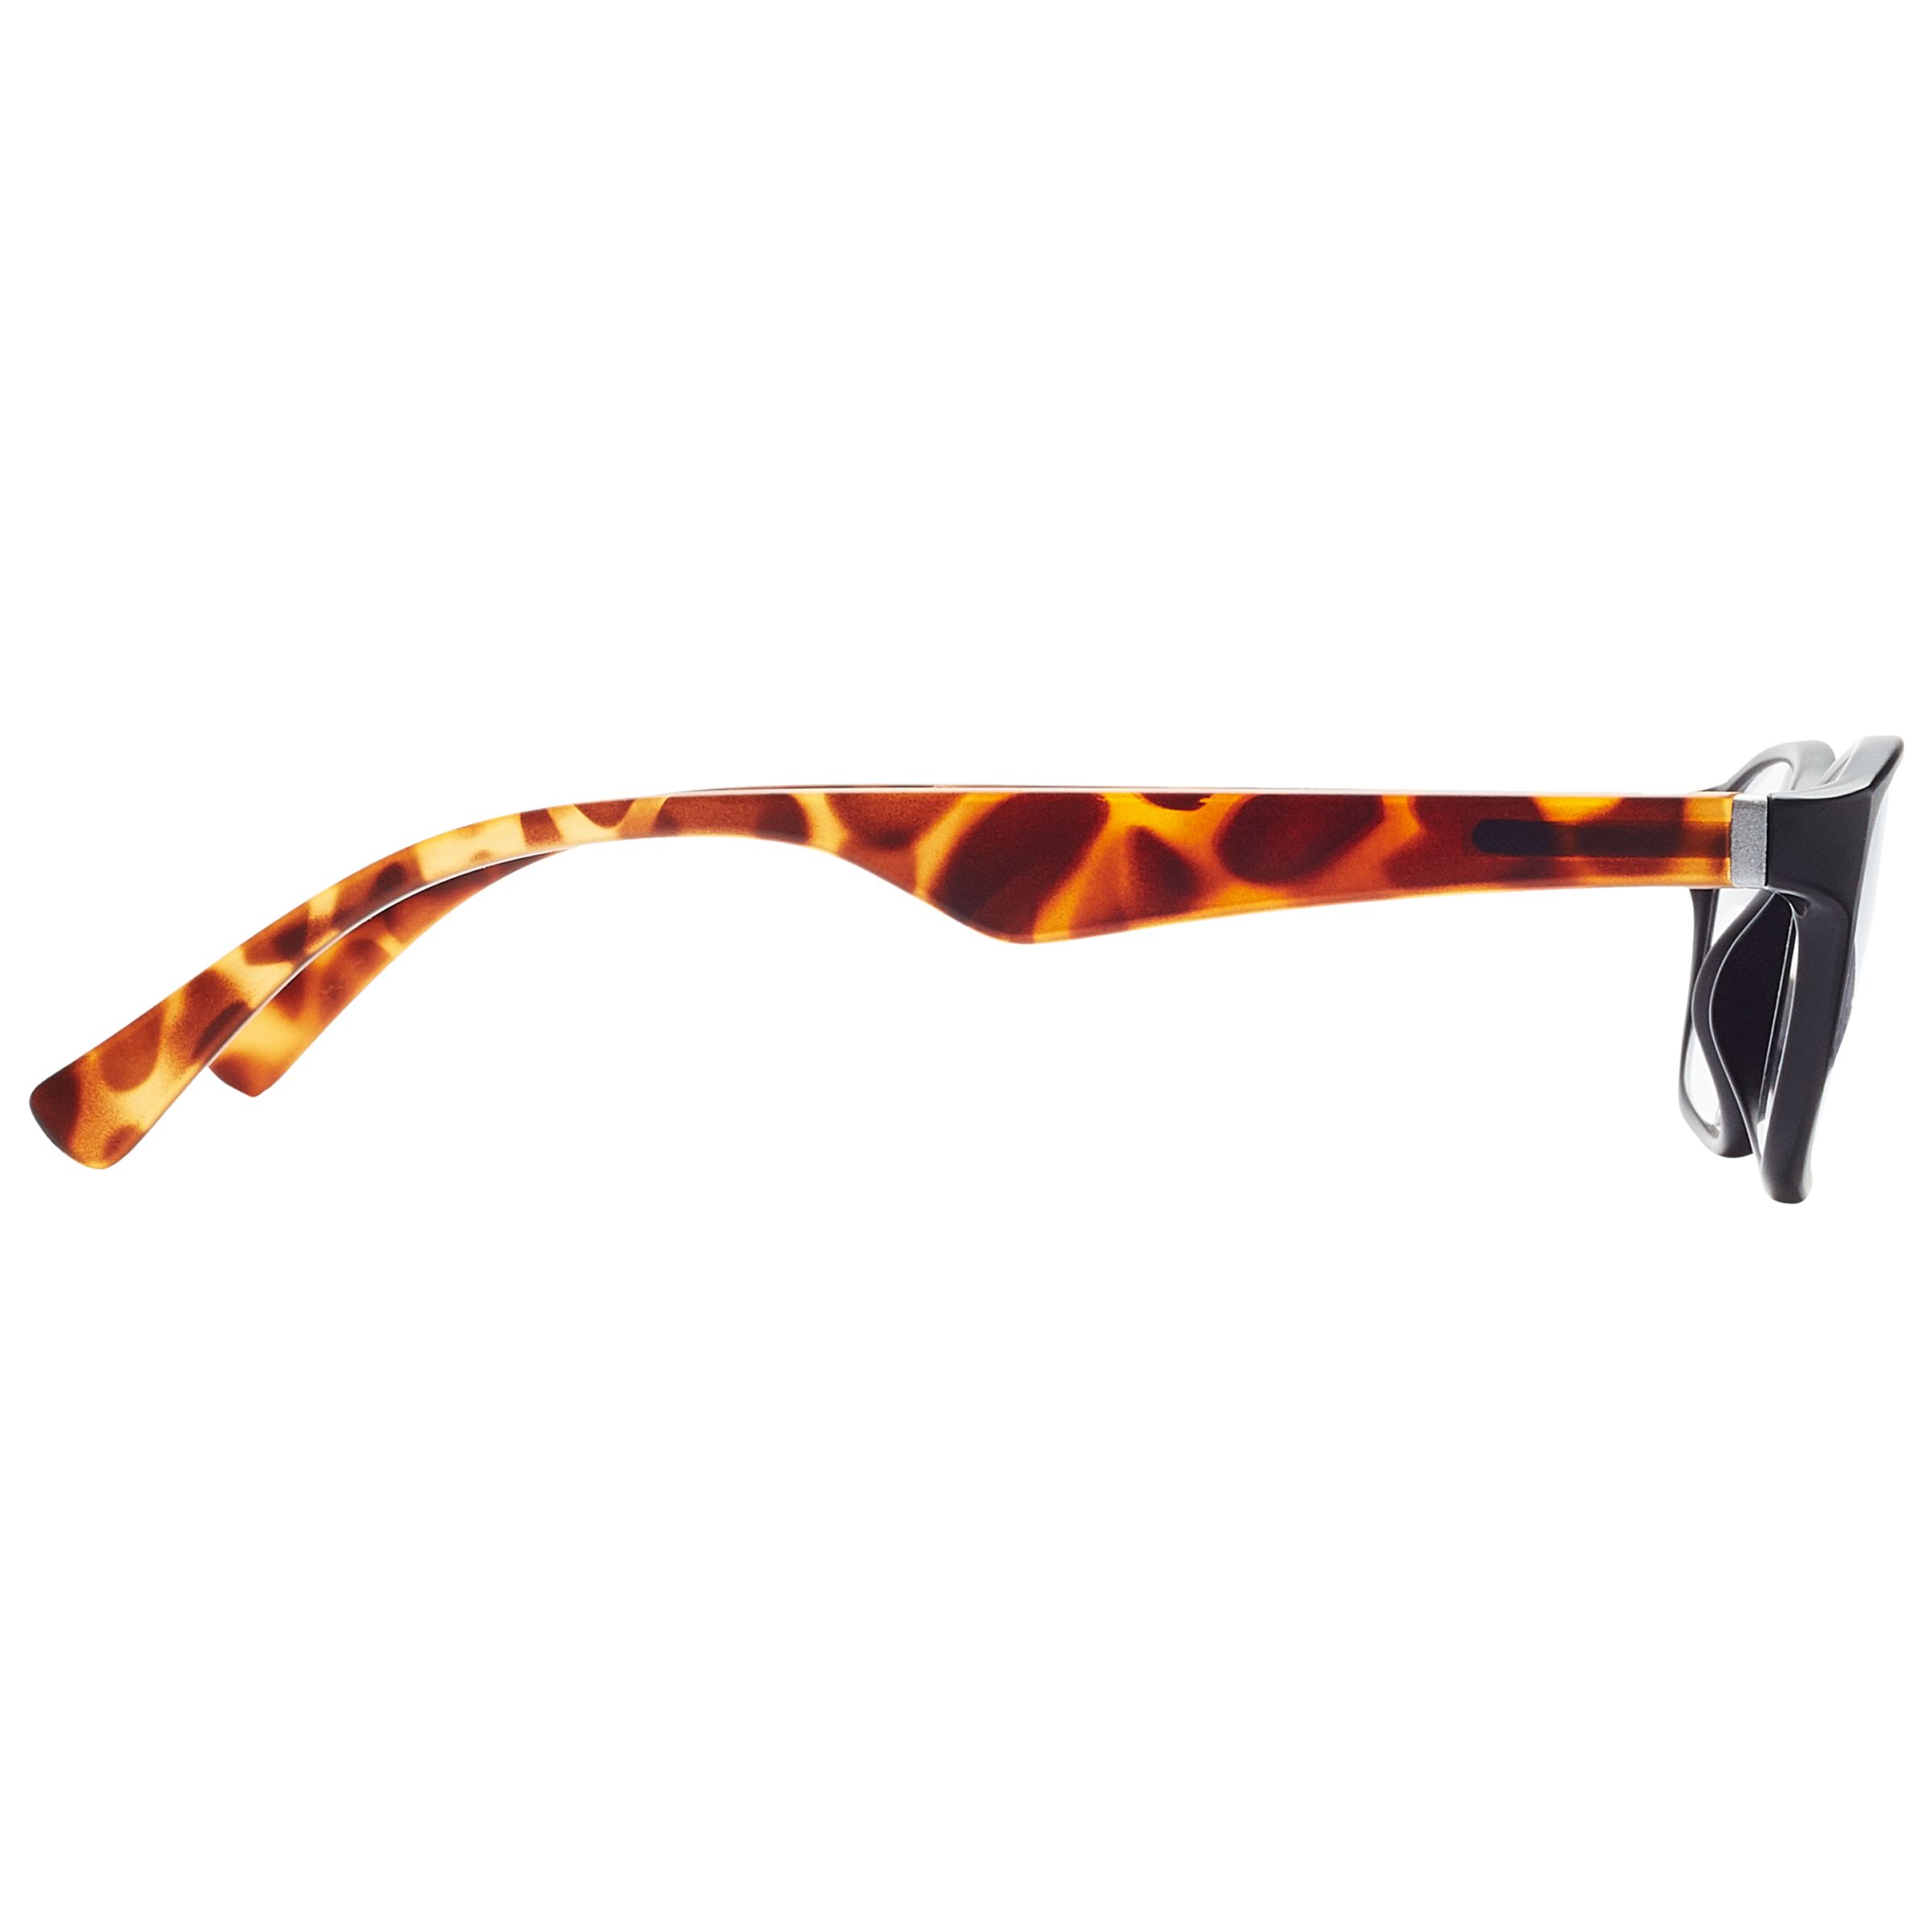 Buy Magnif Eyes Unisex Average Fit Ready Readers Olympia Glasses, Tortoise Online at johnlewis.com